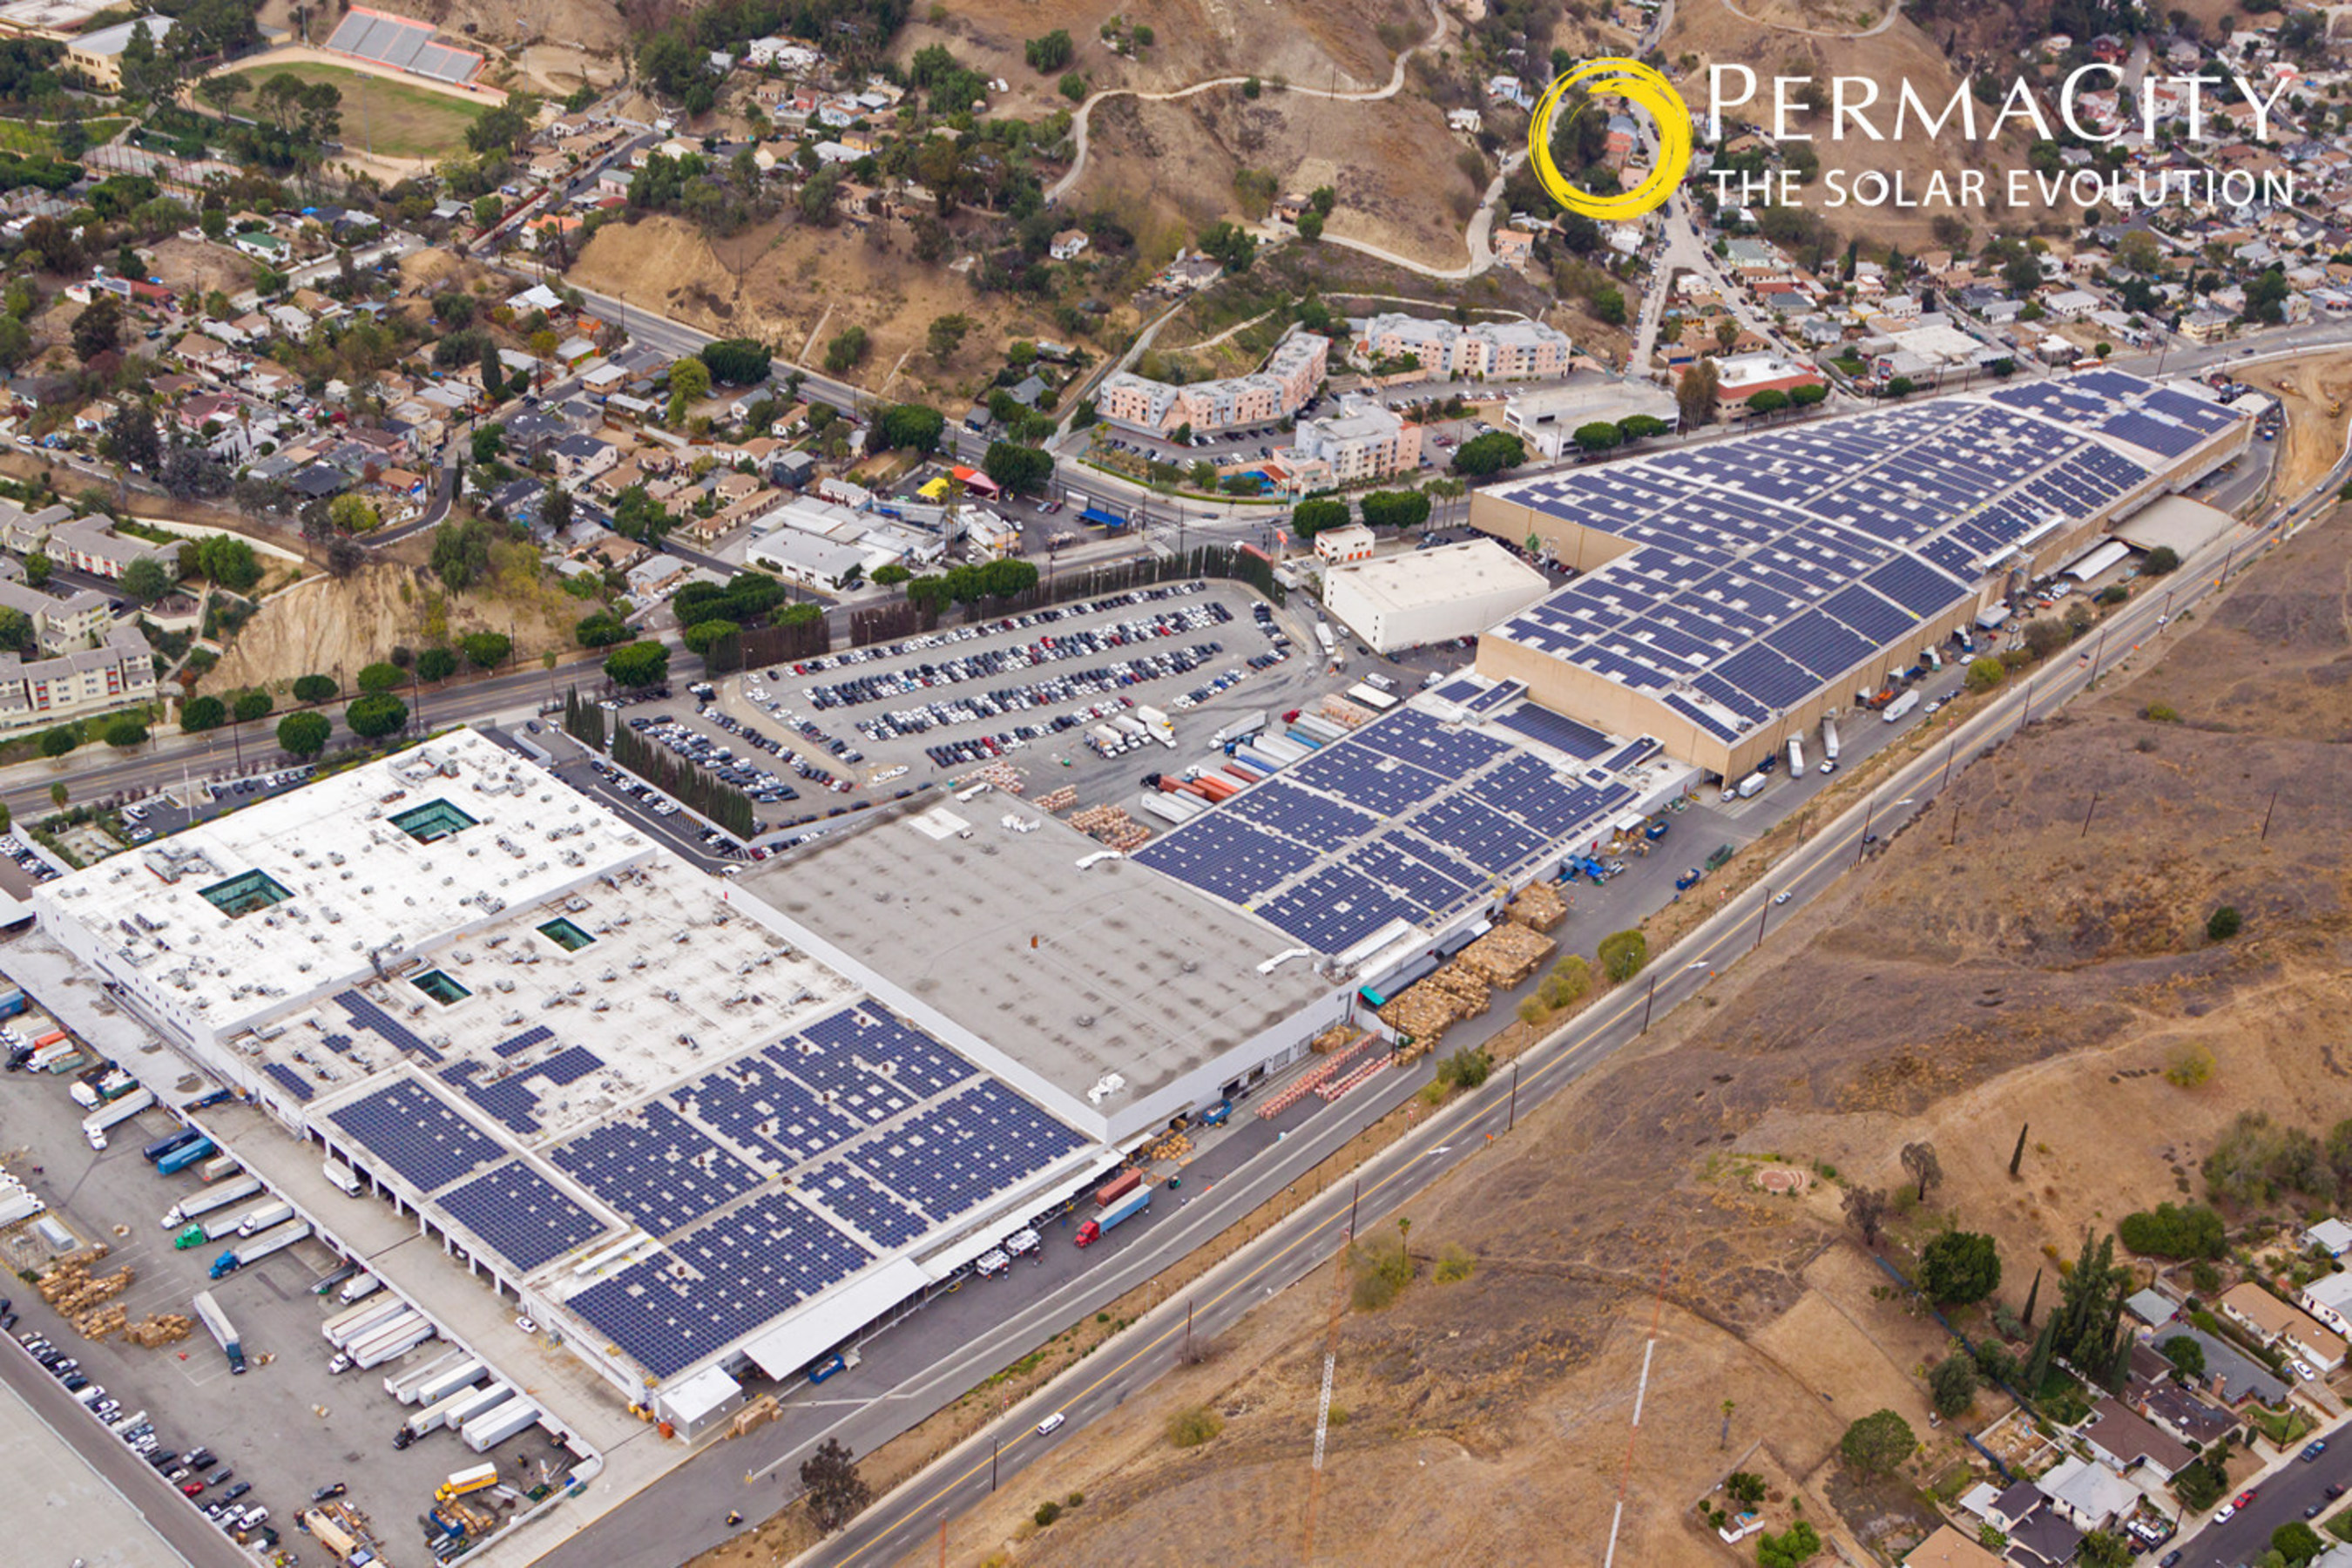 Forever 21's 5MW PermaCity Solar System